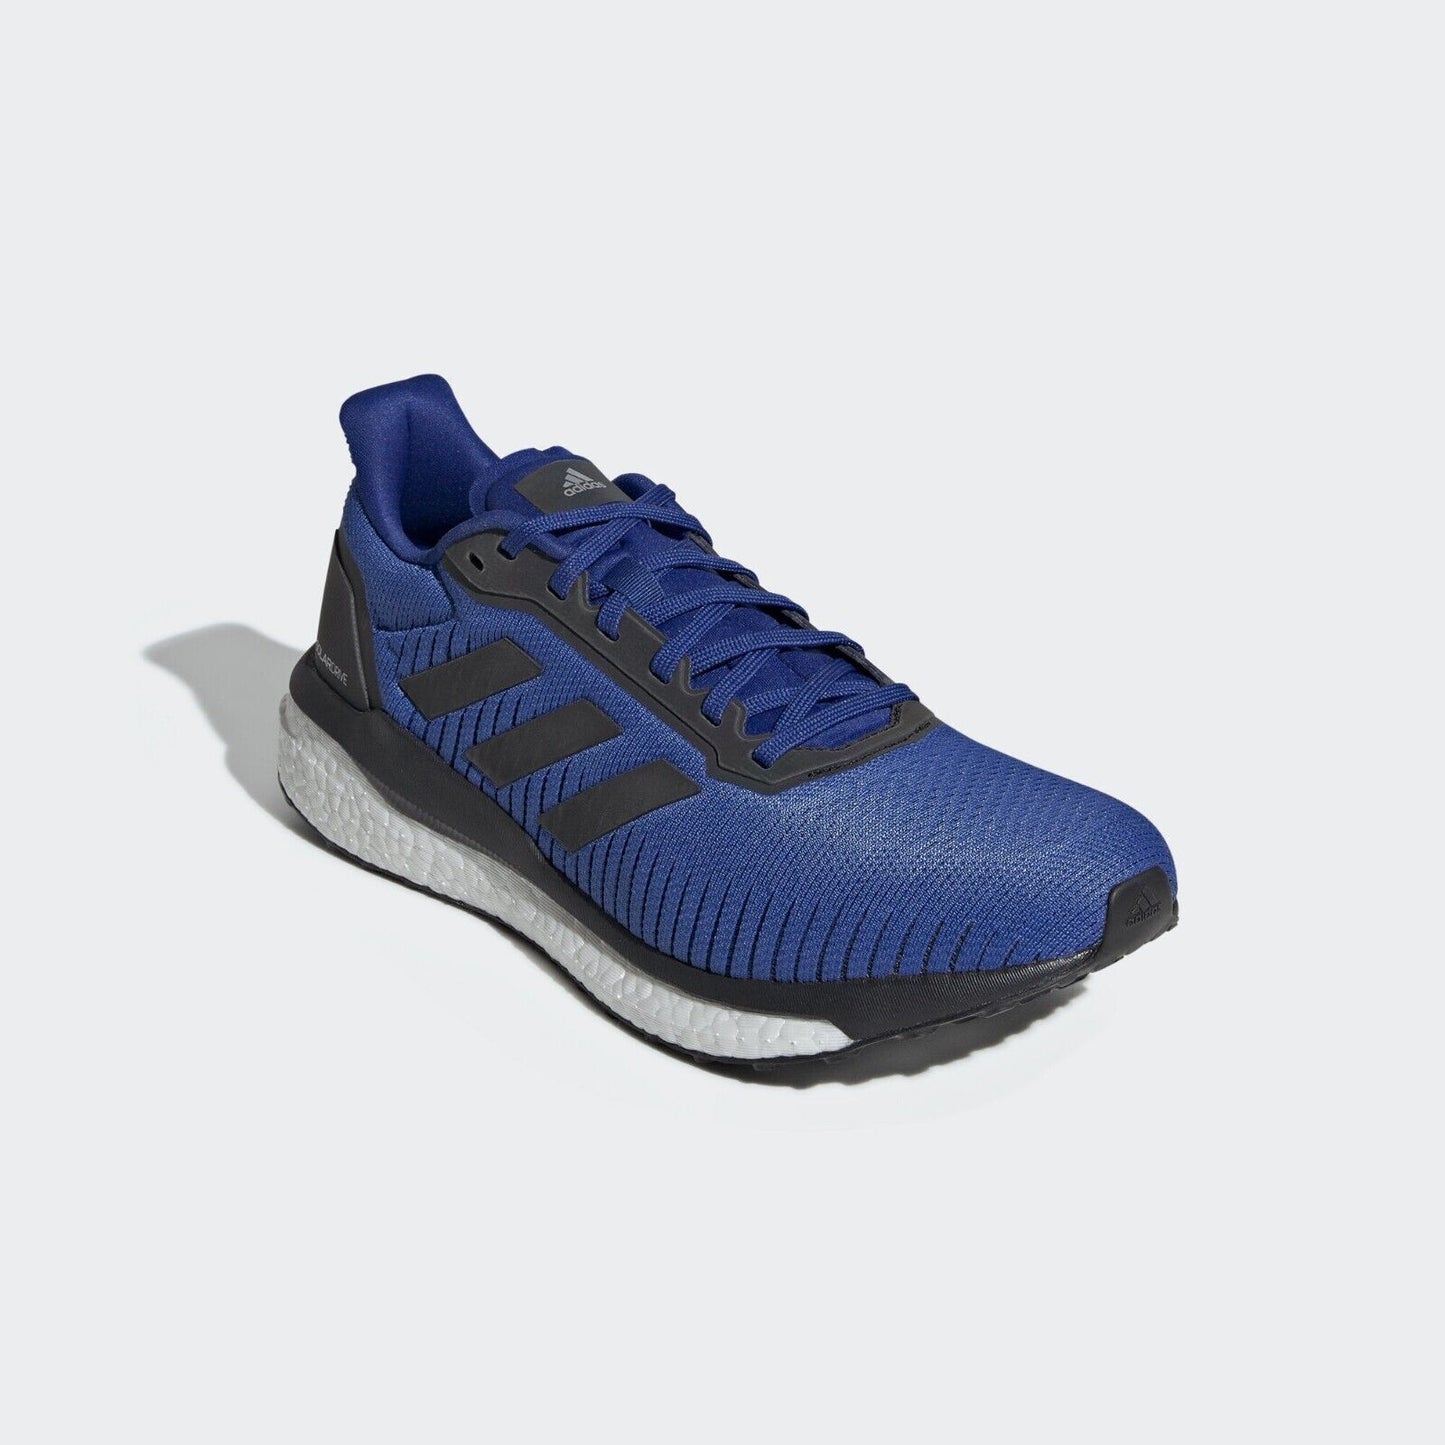 adidas Solar Drive 19 Mens Running Shoes SIZE 7.5 8.5 11 11.5 Blue Trainers